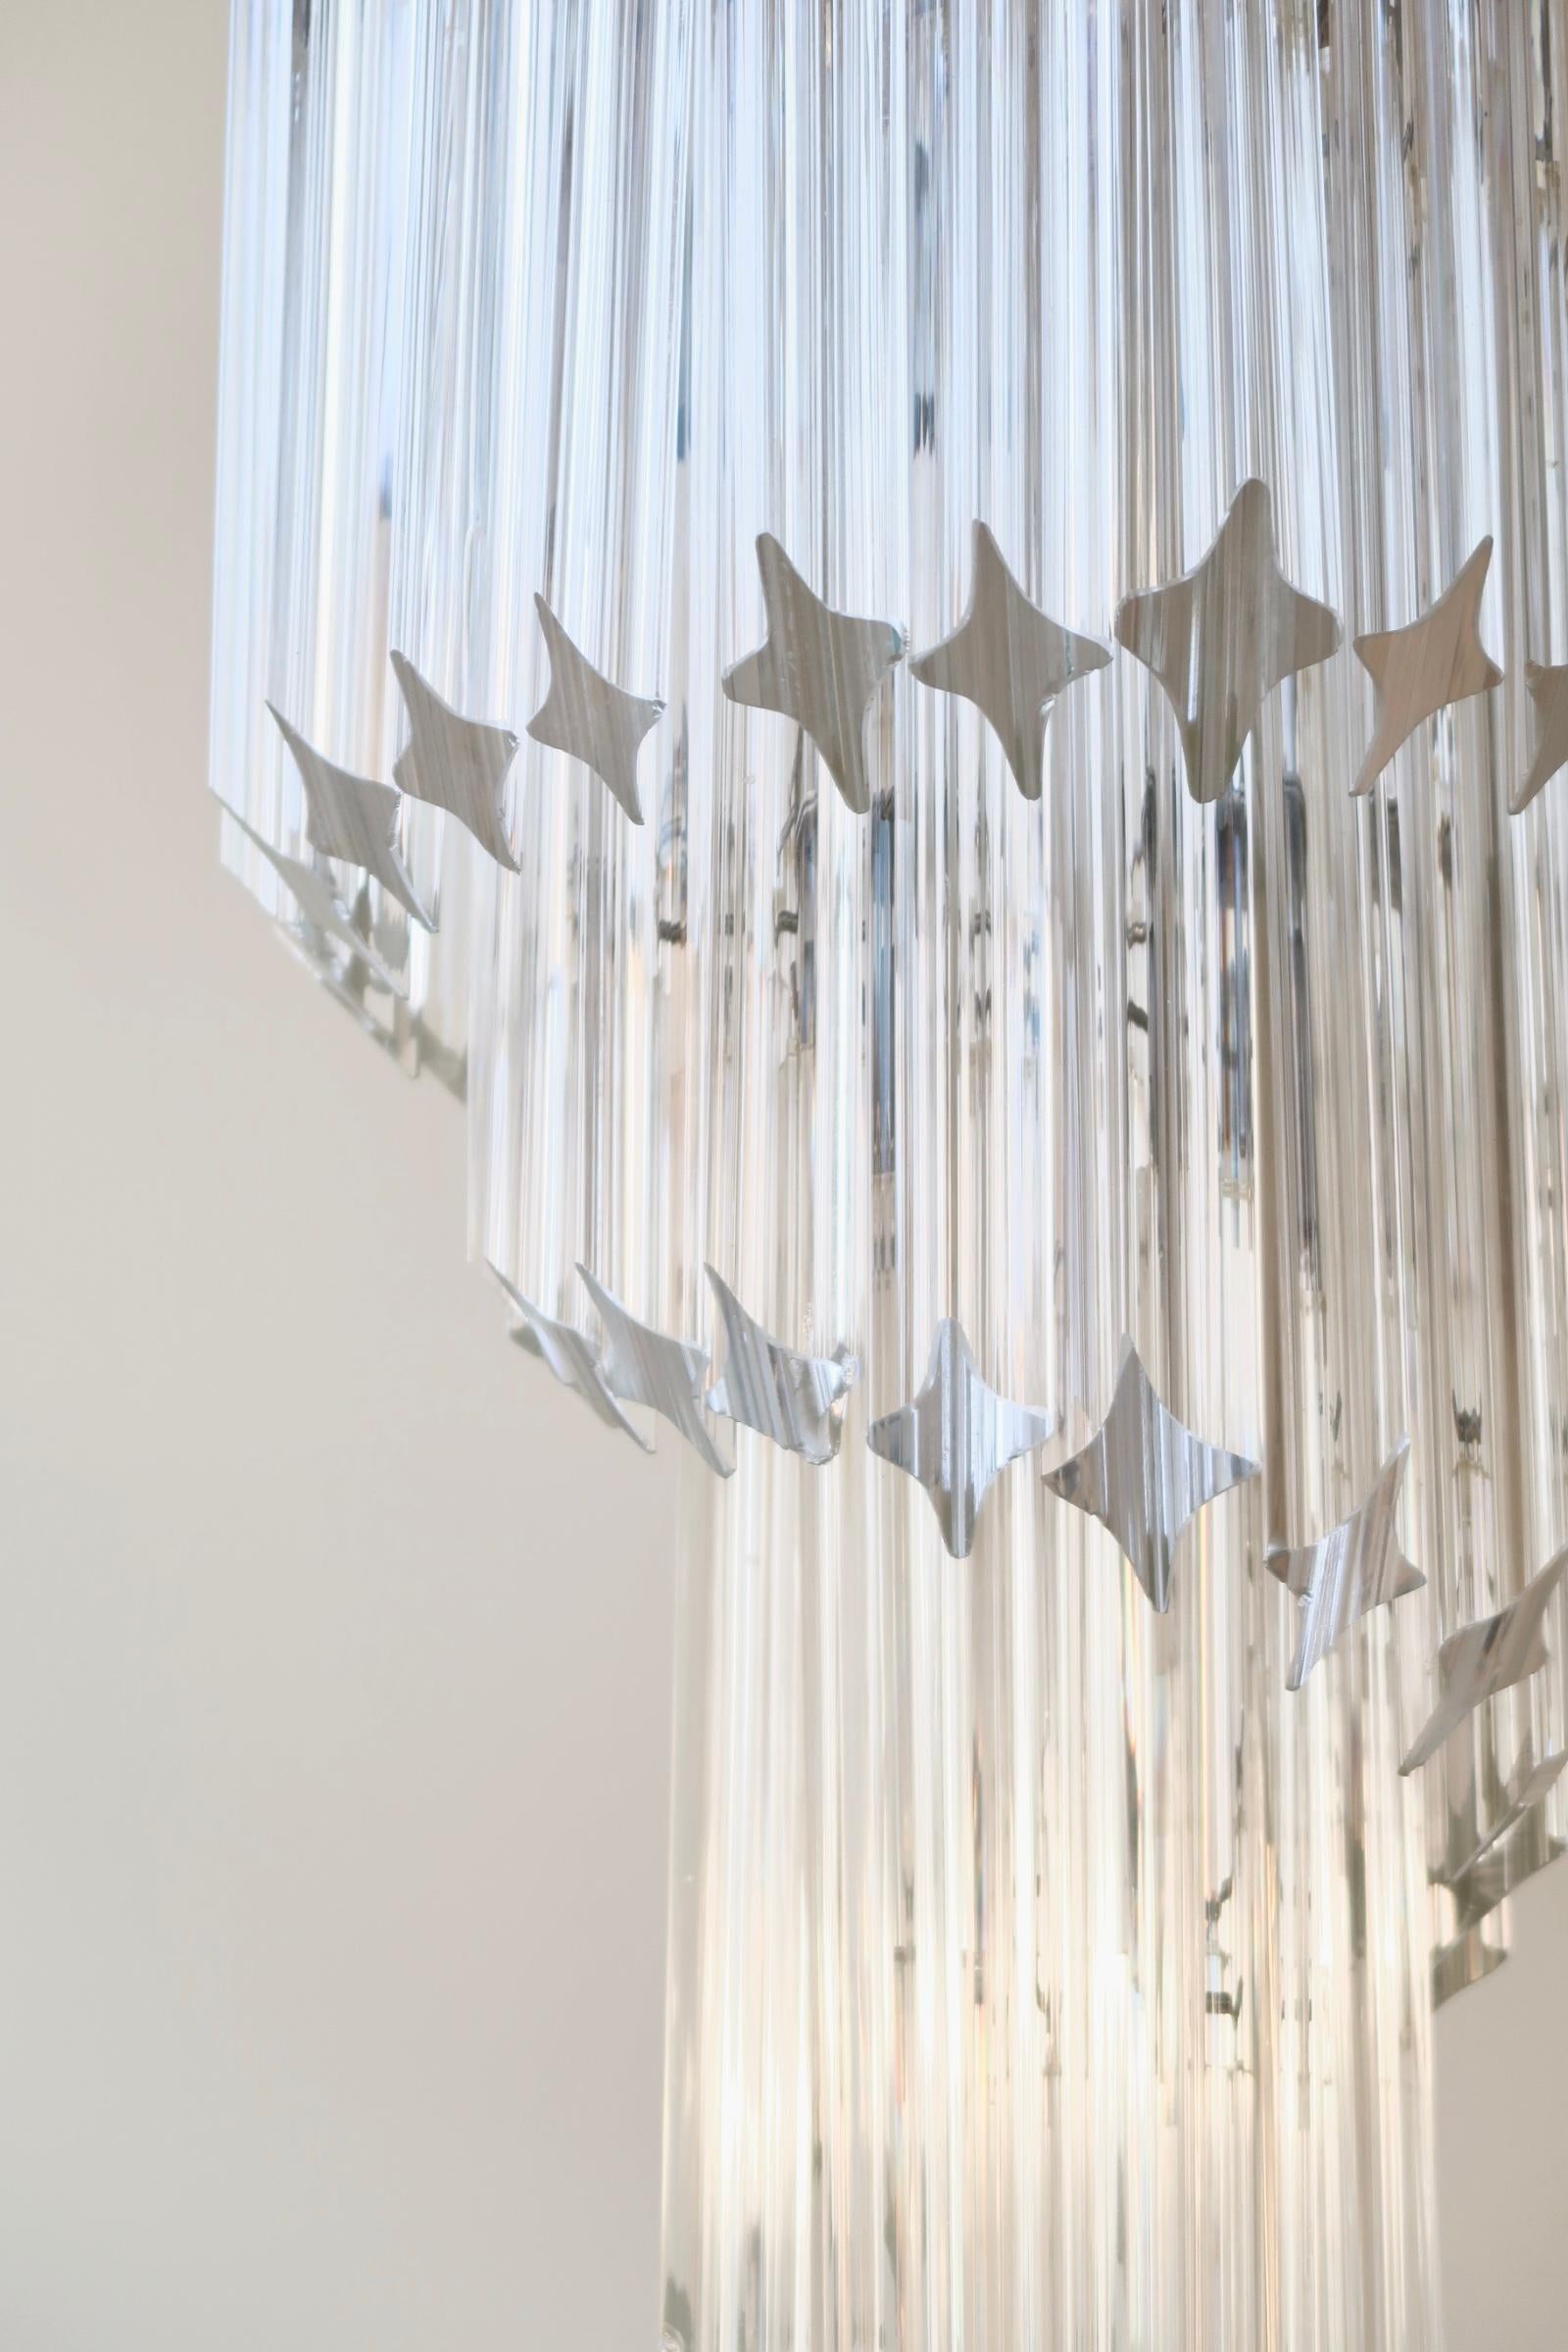 The chandelier consists of 54 mouth-blown quadridri prisms / glass rods in a transparent glass set on a chrome frame. It has 5 x E14 sockets (max. 60W) and provides plenty of light. Handmade in Italy. A certain proportion of the prisms have typical